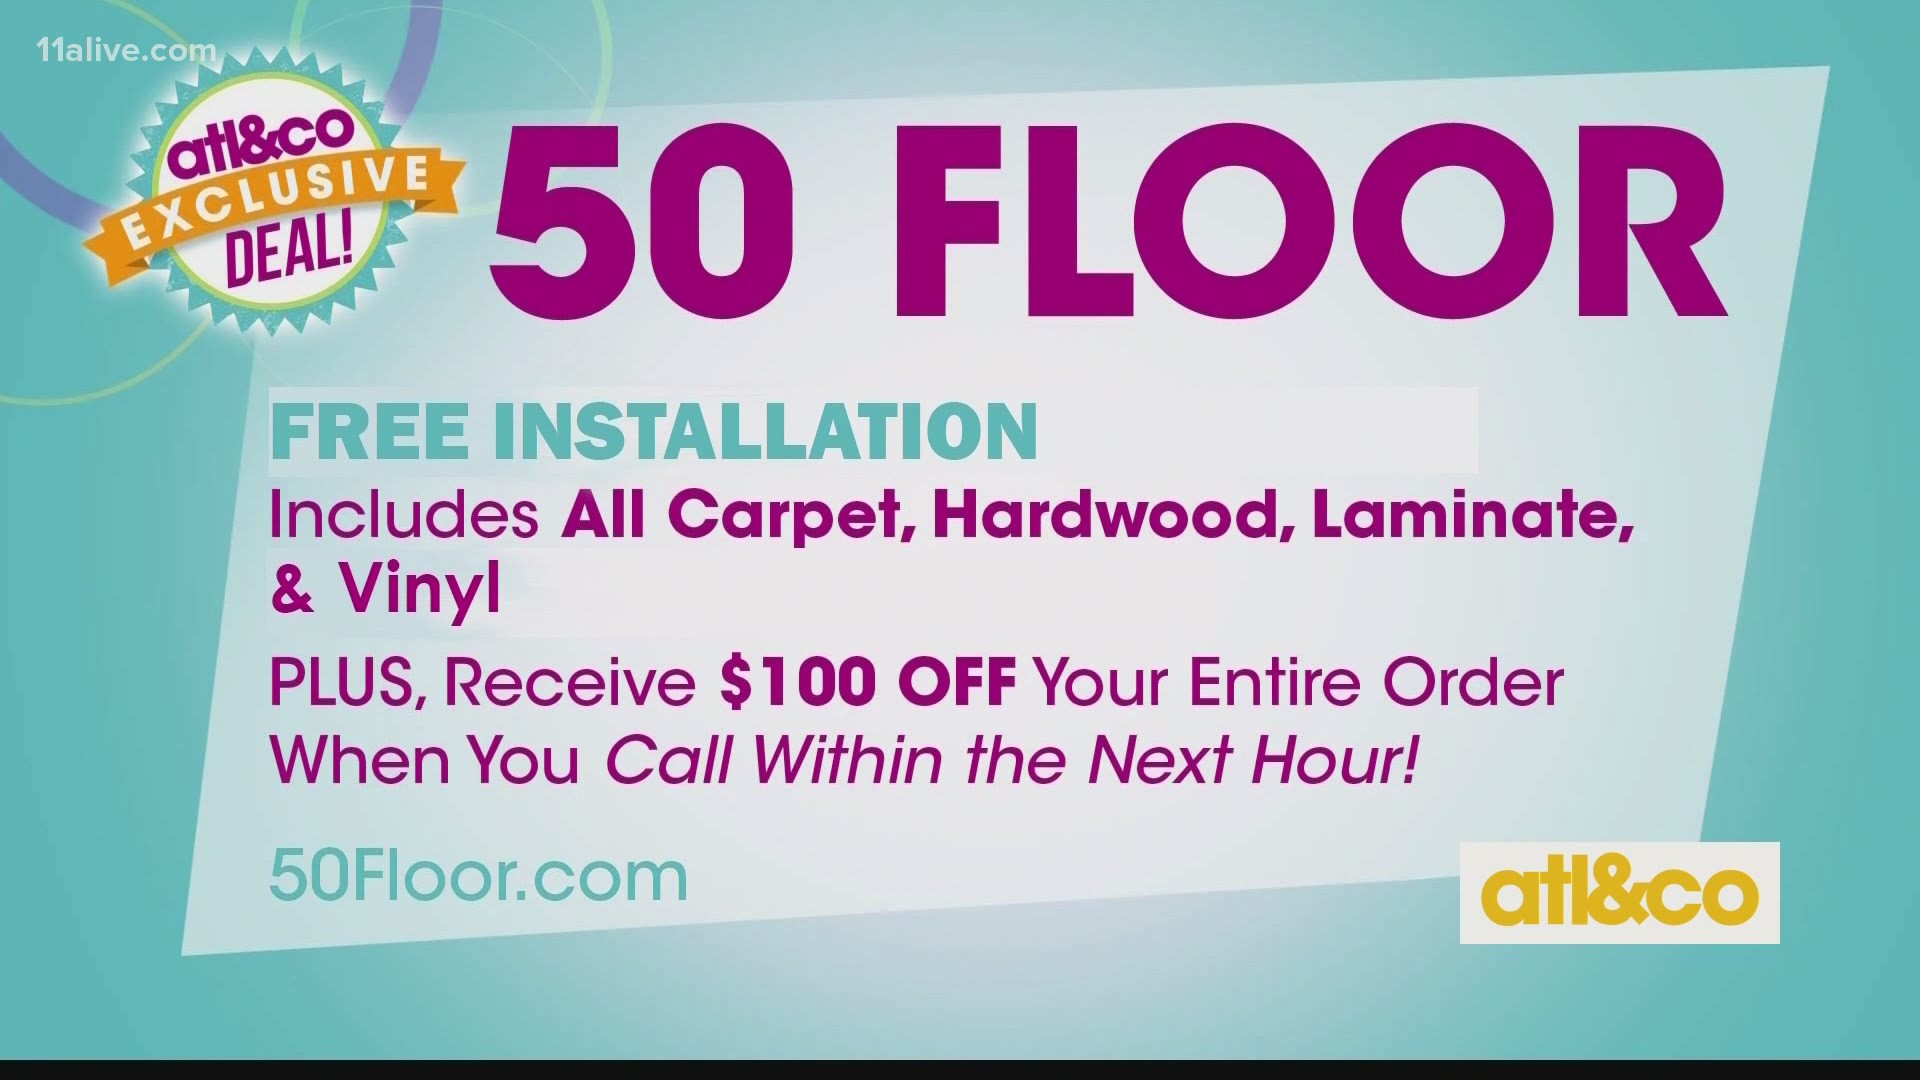 Remodel with 50 Floor and get free installation and $100 off your entire order.